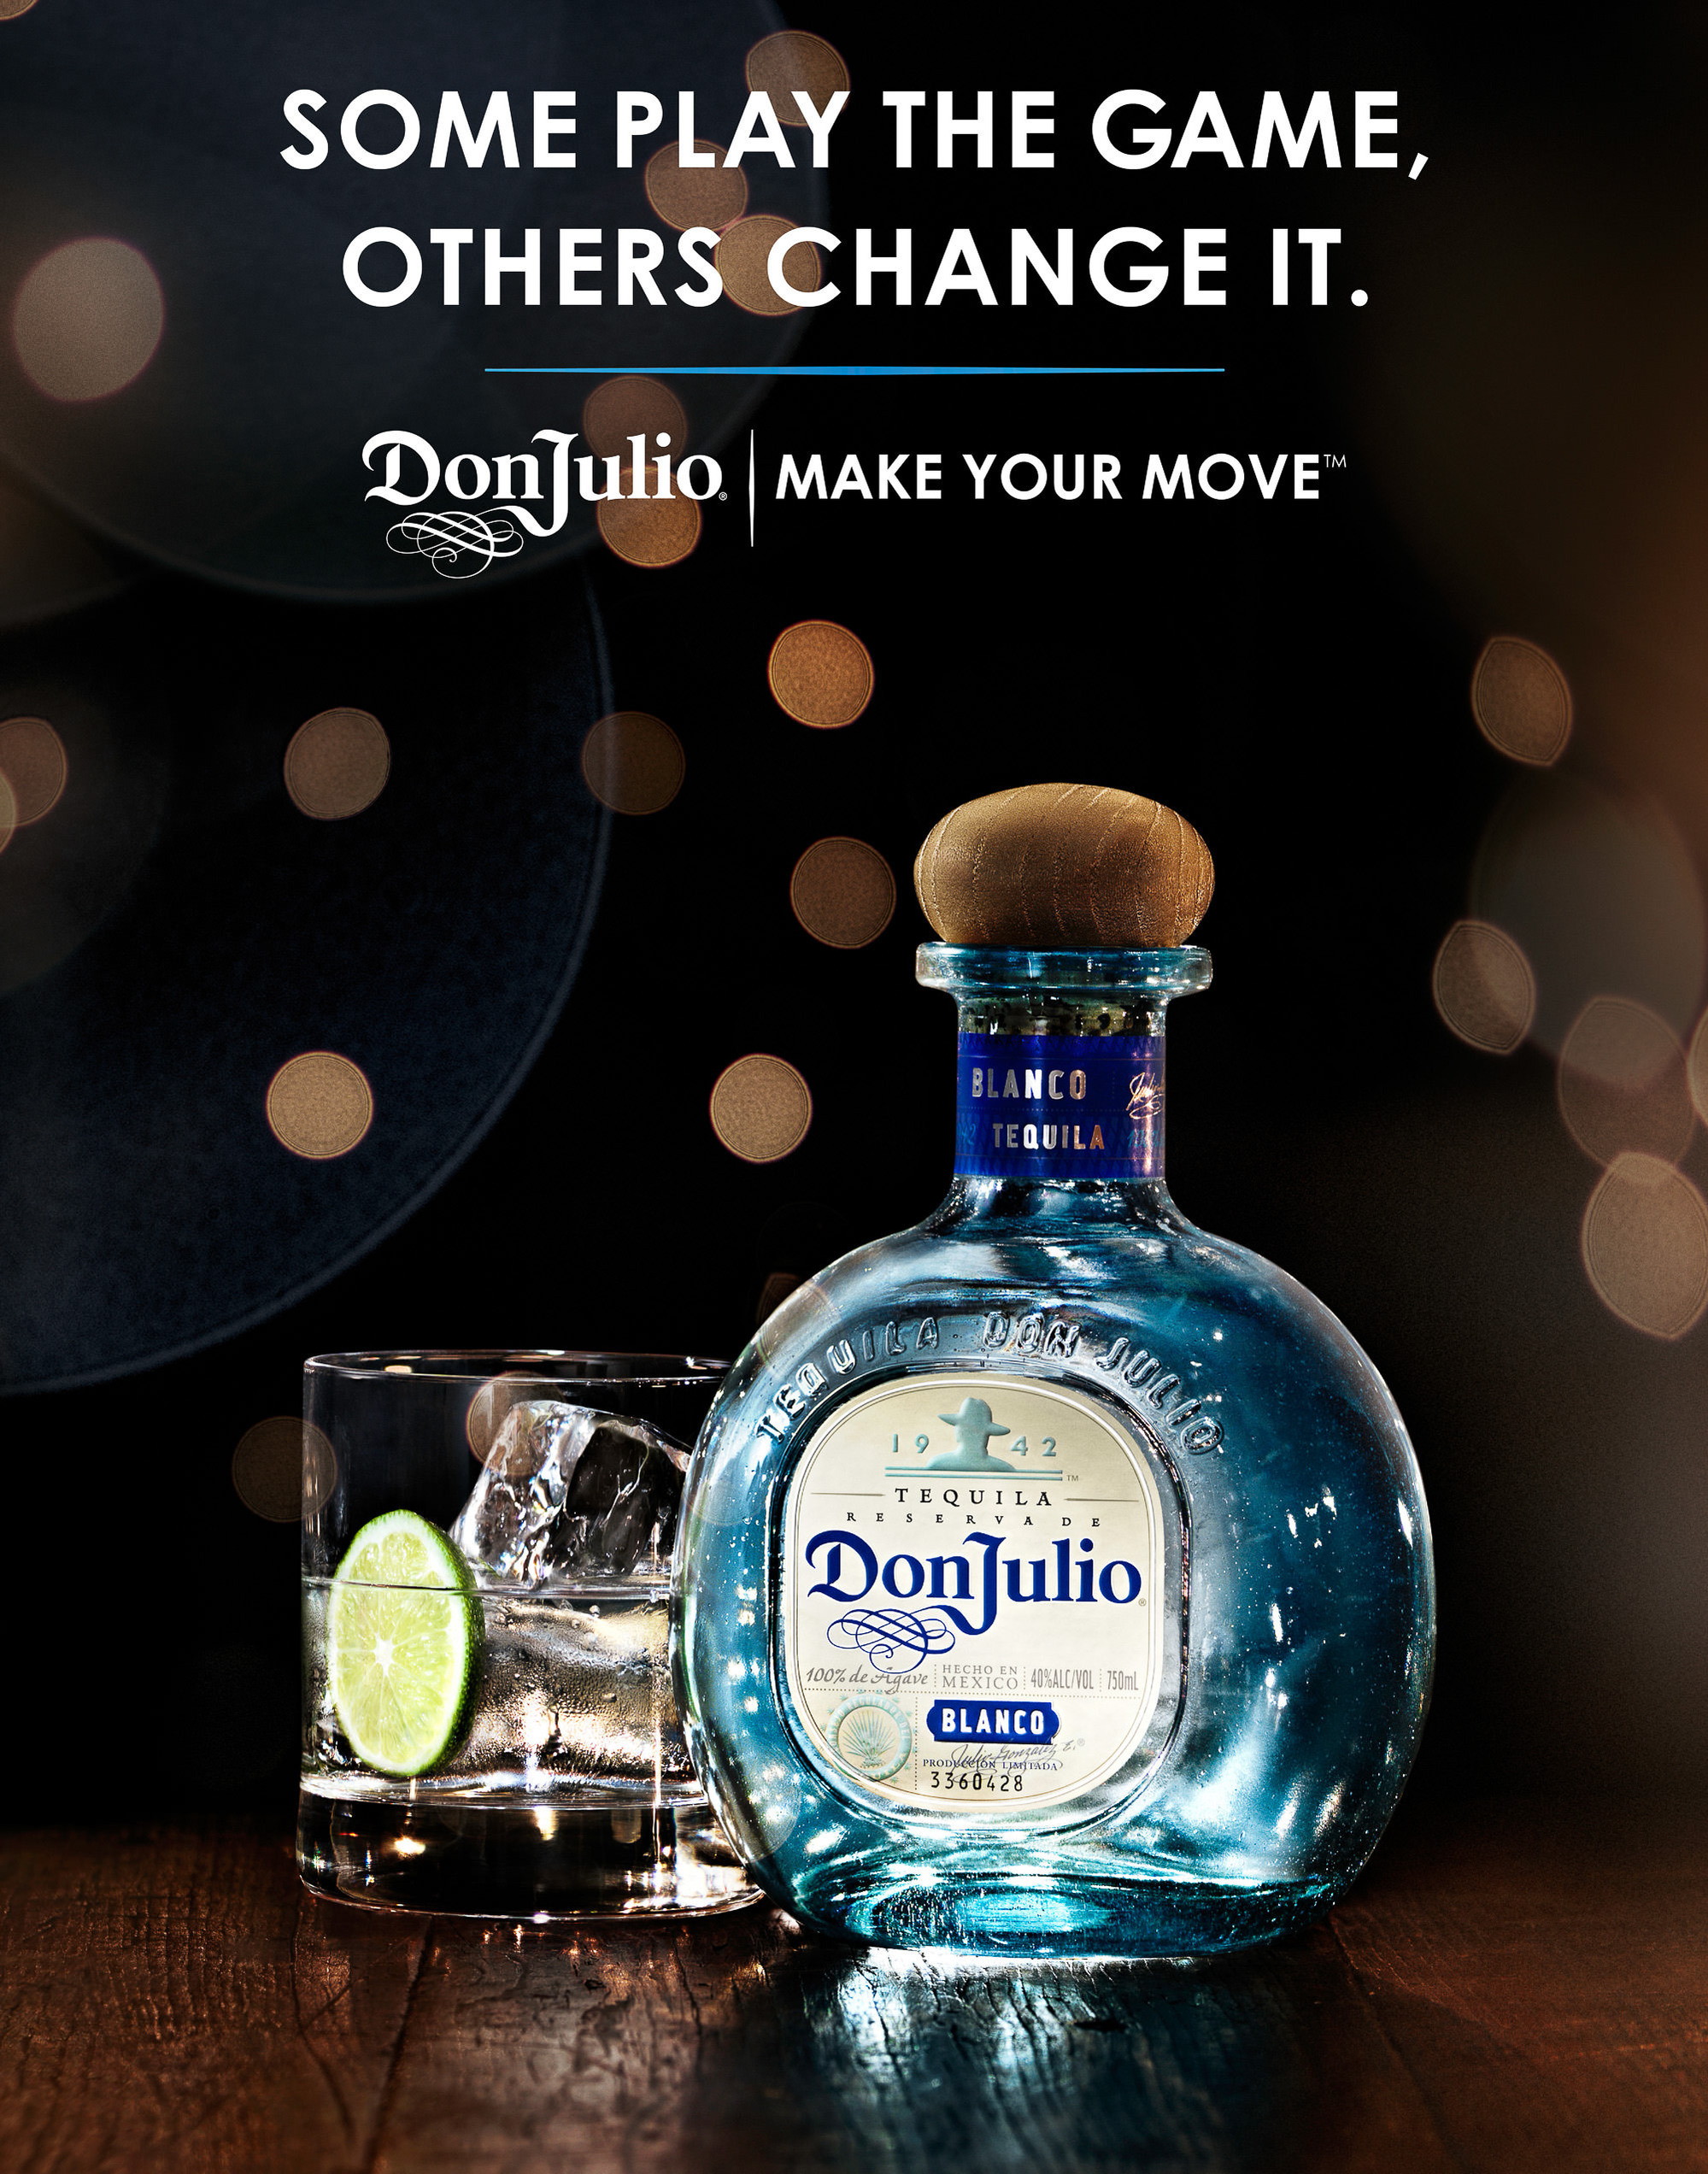 Don Julio Tequila Blanco beverage campaign Photography by commercial, product & advertising photographer Timothy Hogan in studio Los Angeles